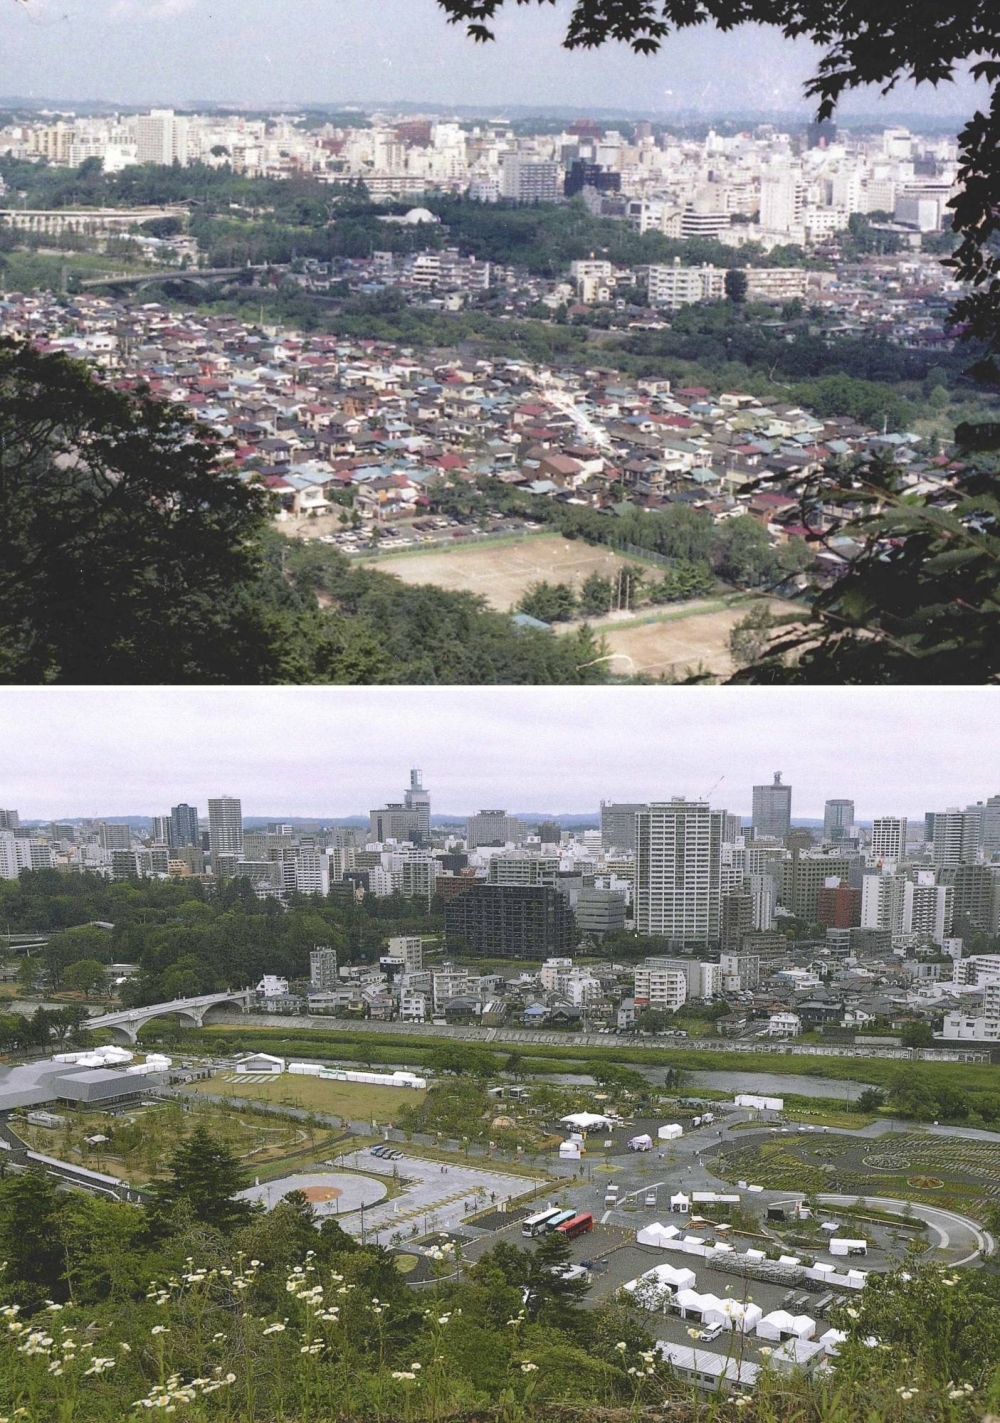 The Oimawashi district of Sendai in 1997 (top) and June 2023